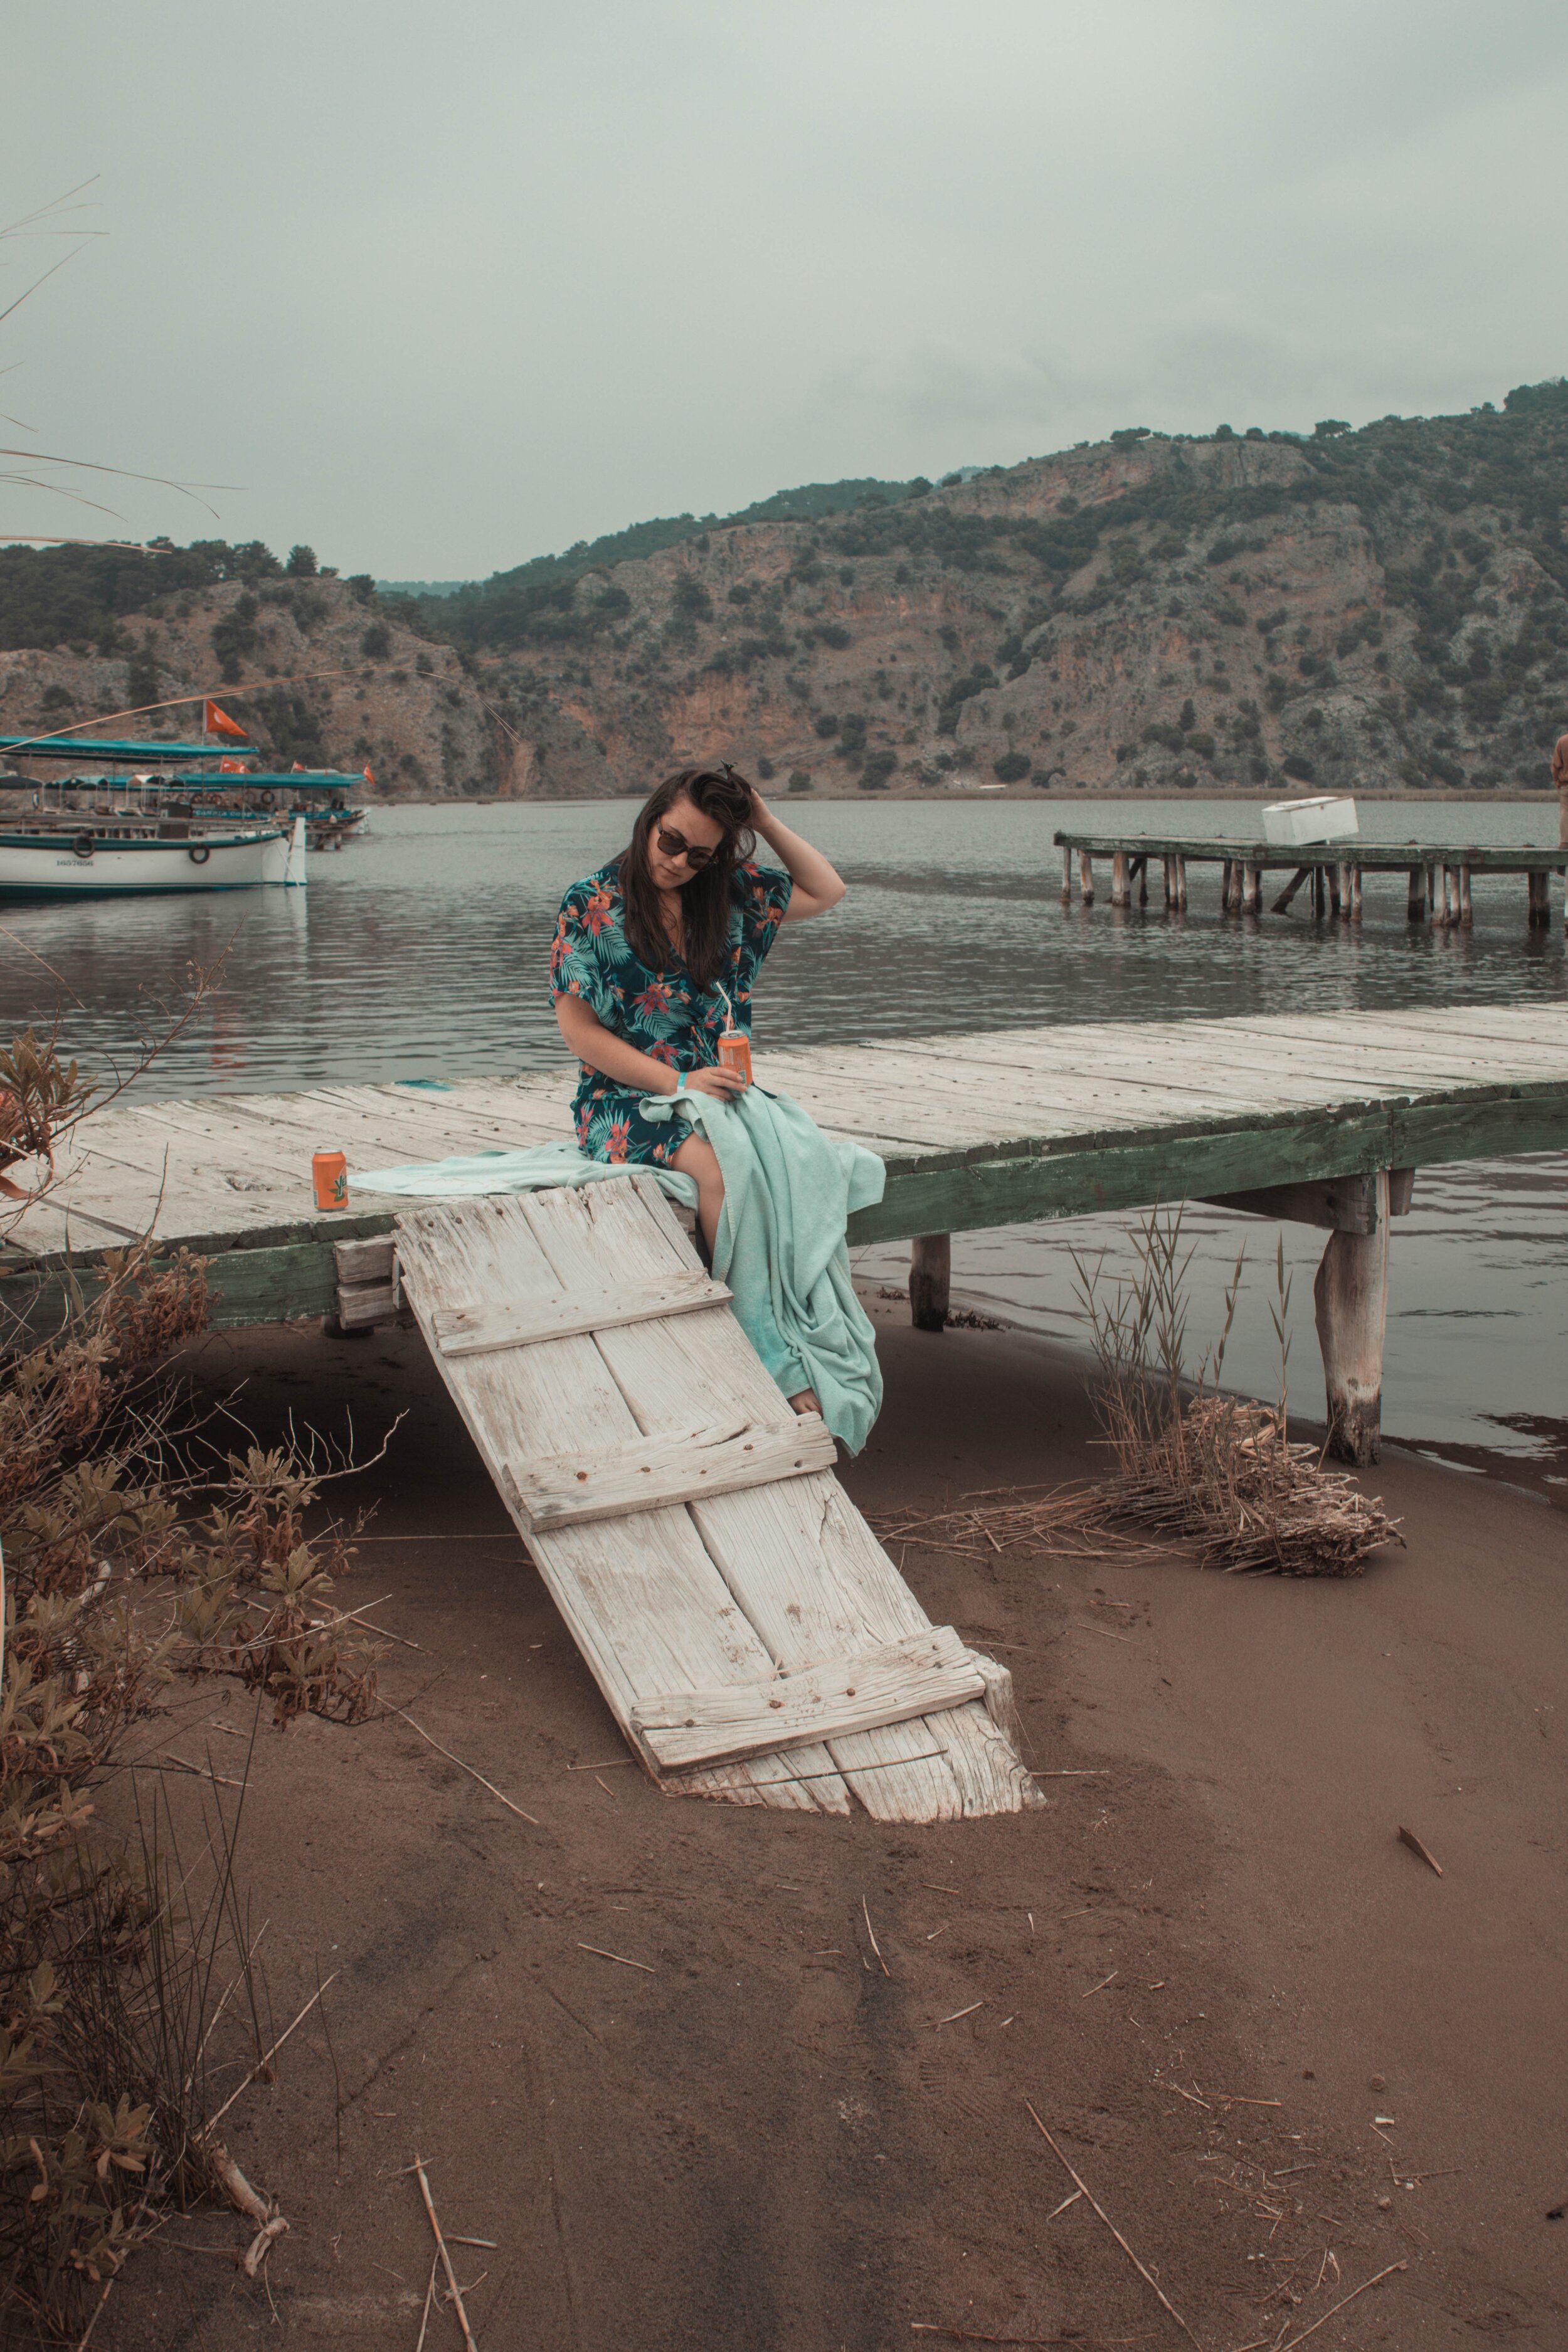 Girl on a dock thinking. Photo by courtney Hobbs on Unsplash